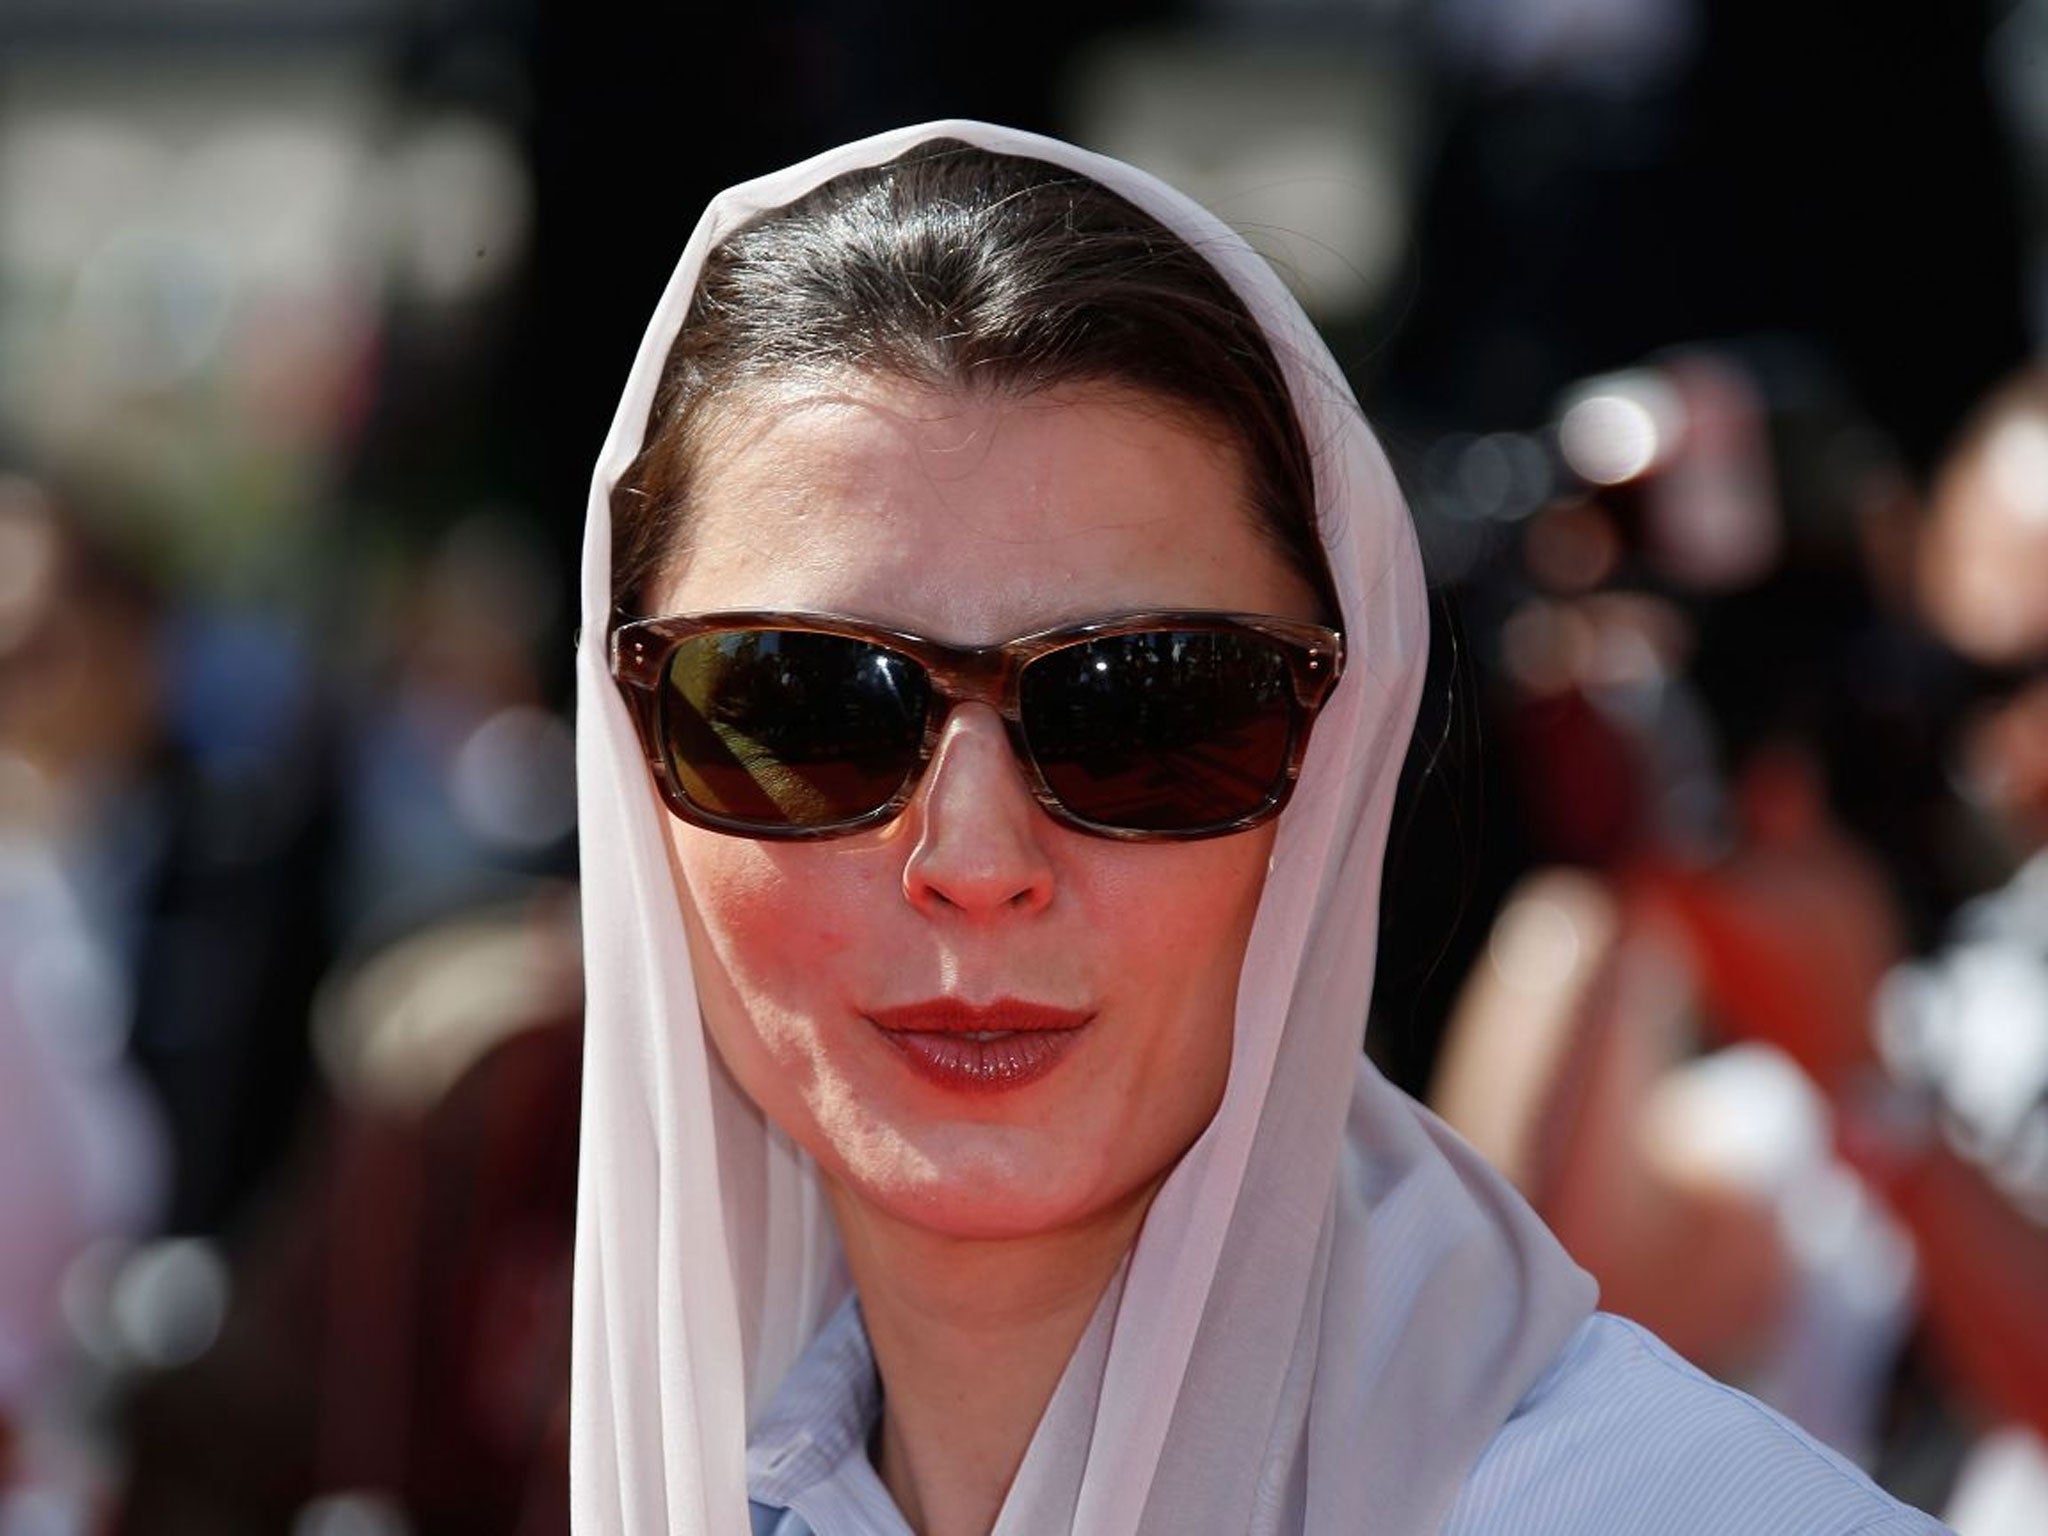 Iranian actress and member of the Feature Films Jury Leila Hatami poses as she arrives for the screening of the film "Le Meraviglie (The Wonders)" at the 67th edition of the Cannes Film Festival in Cannes, southern France, on 18, 2014